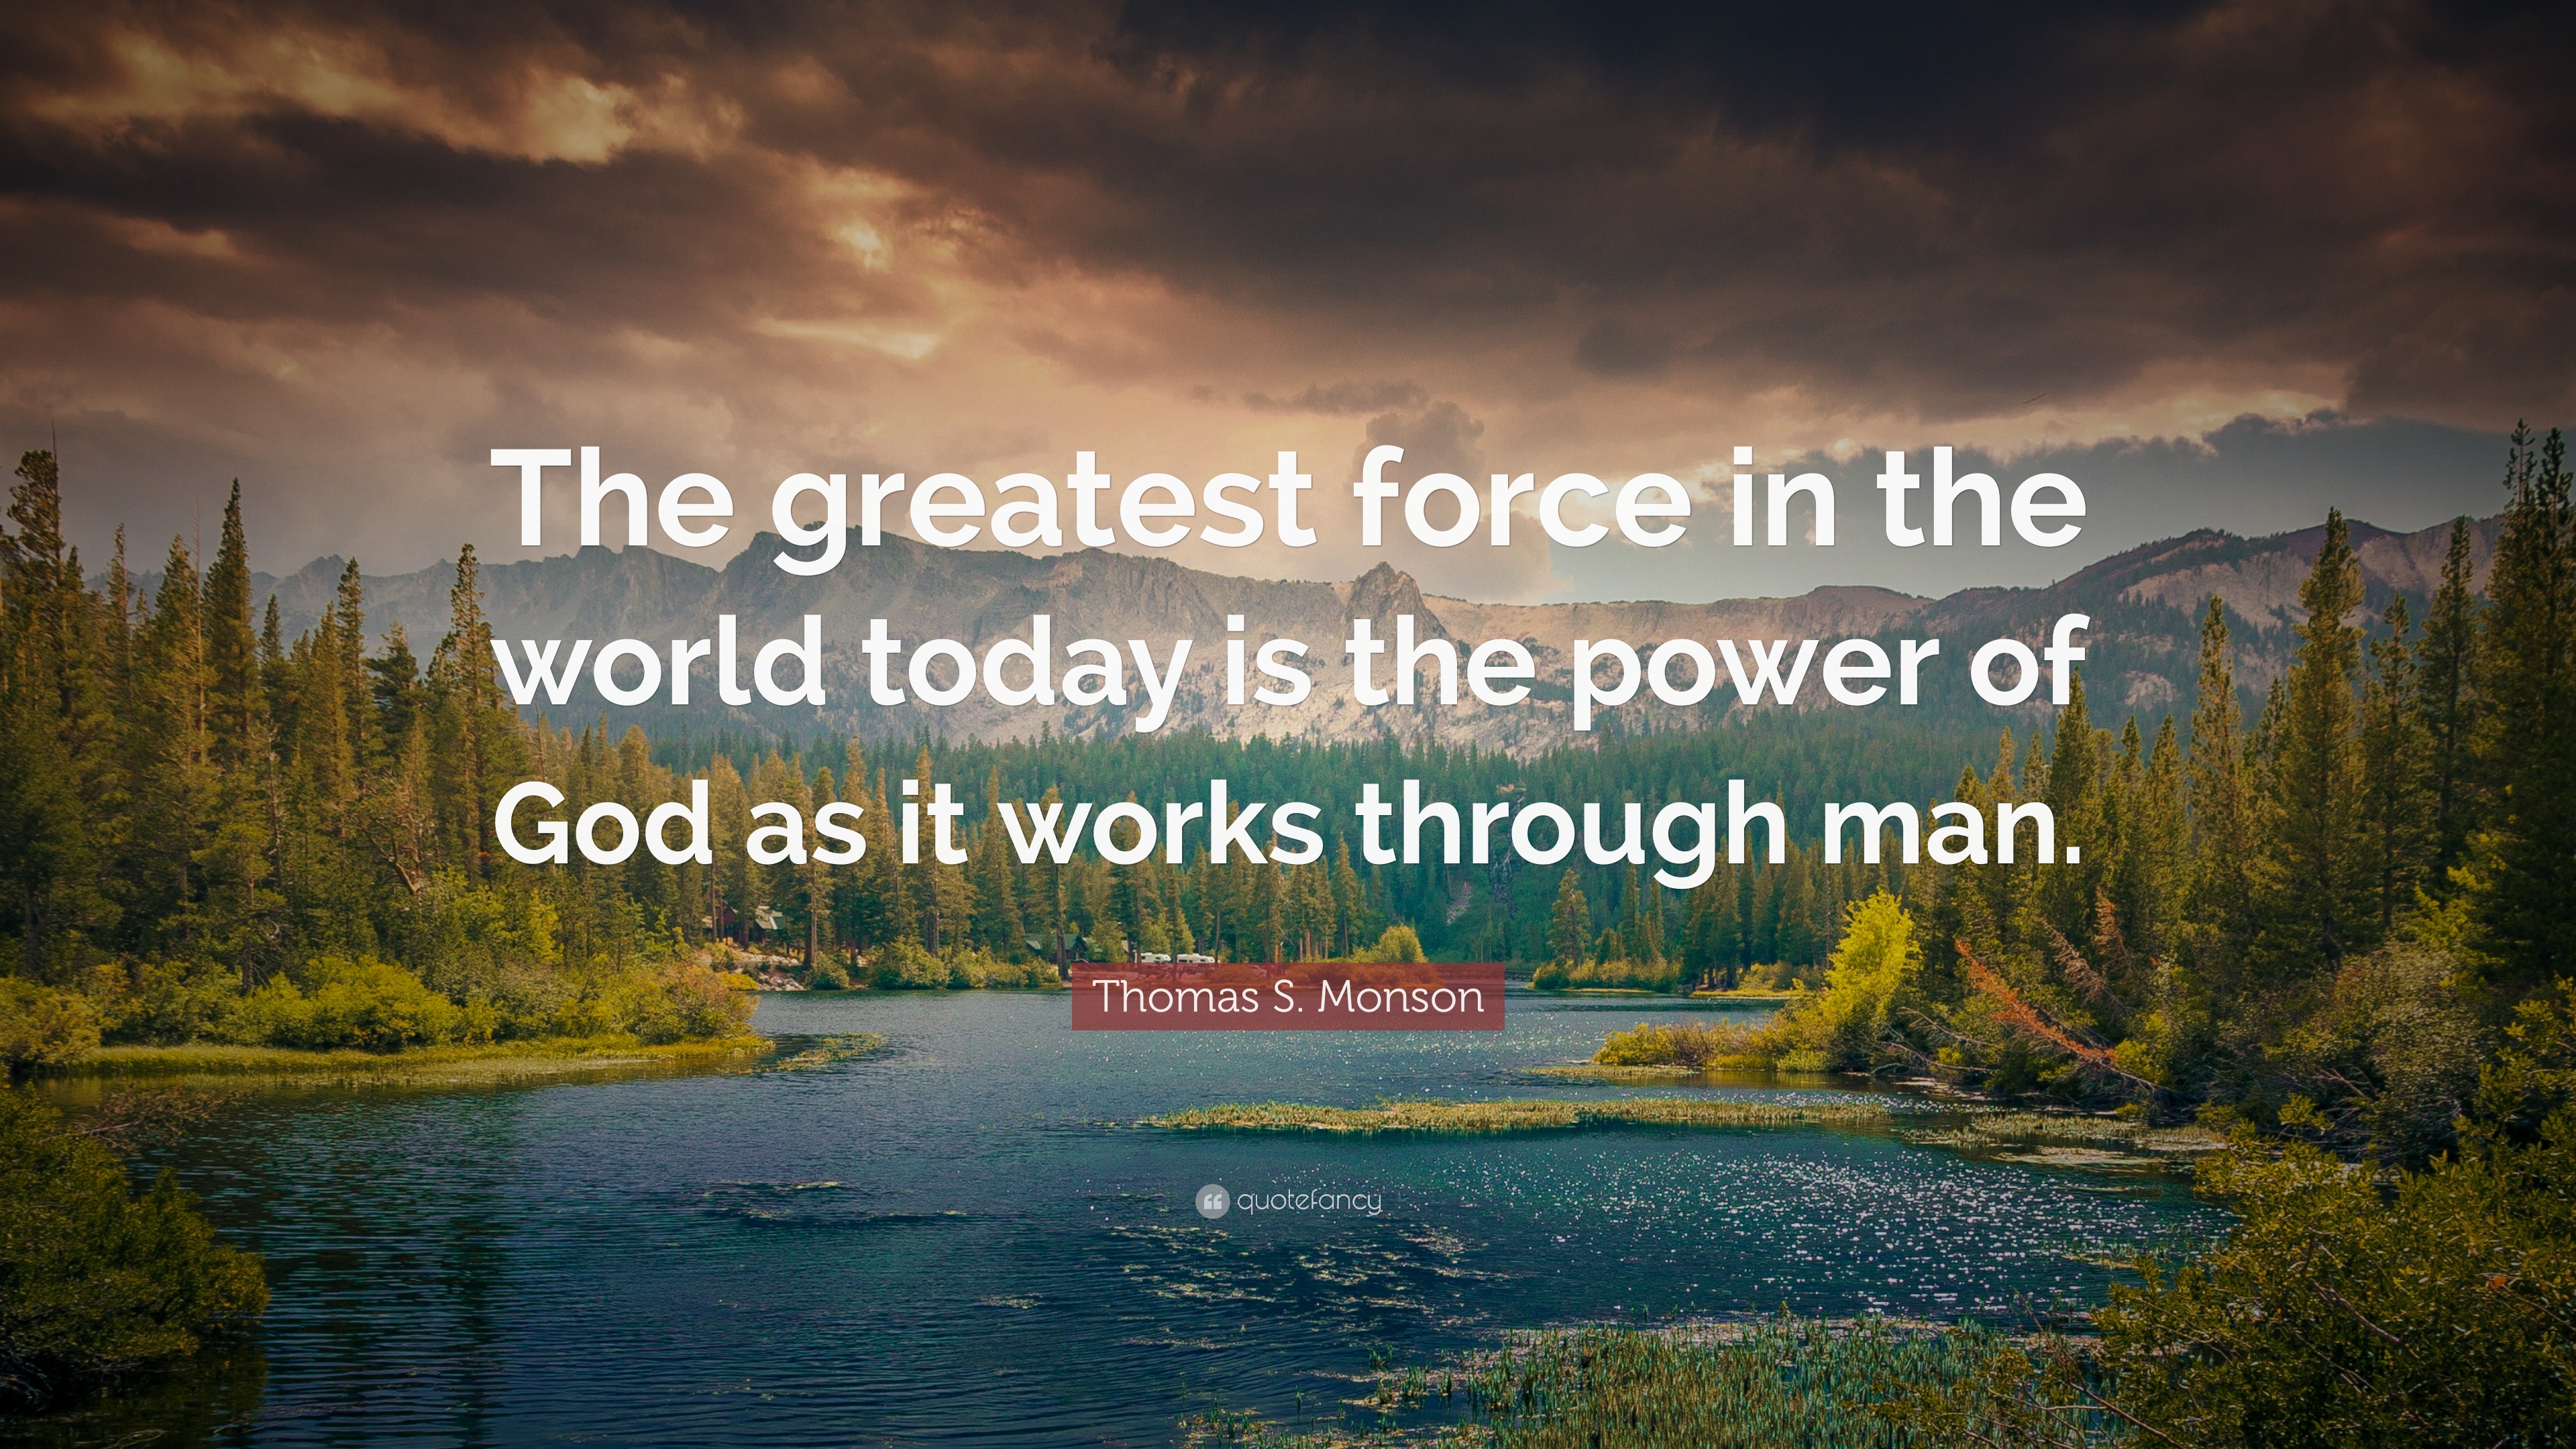 Thomas S. Monson Quote: “The greatest force in the world today is 